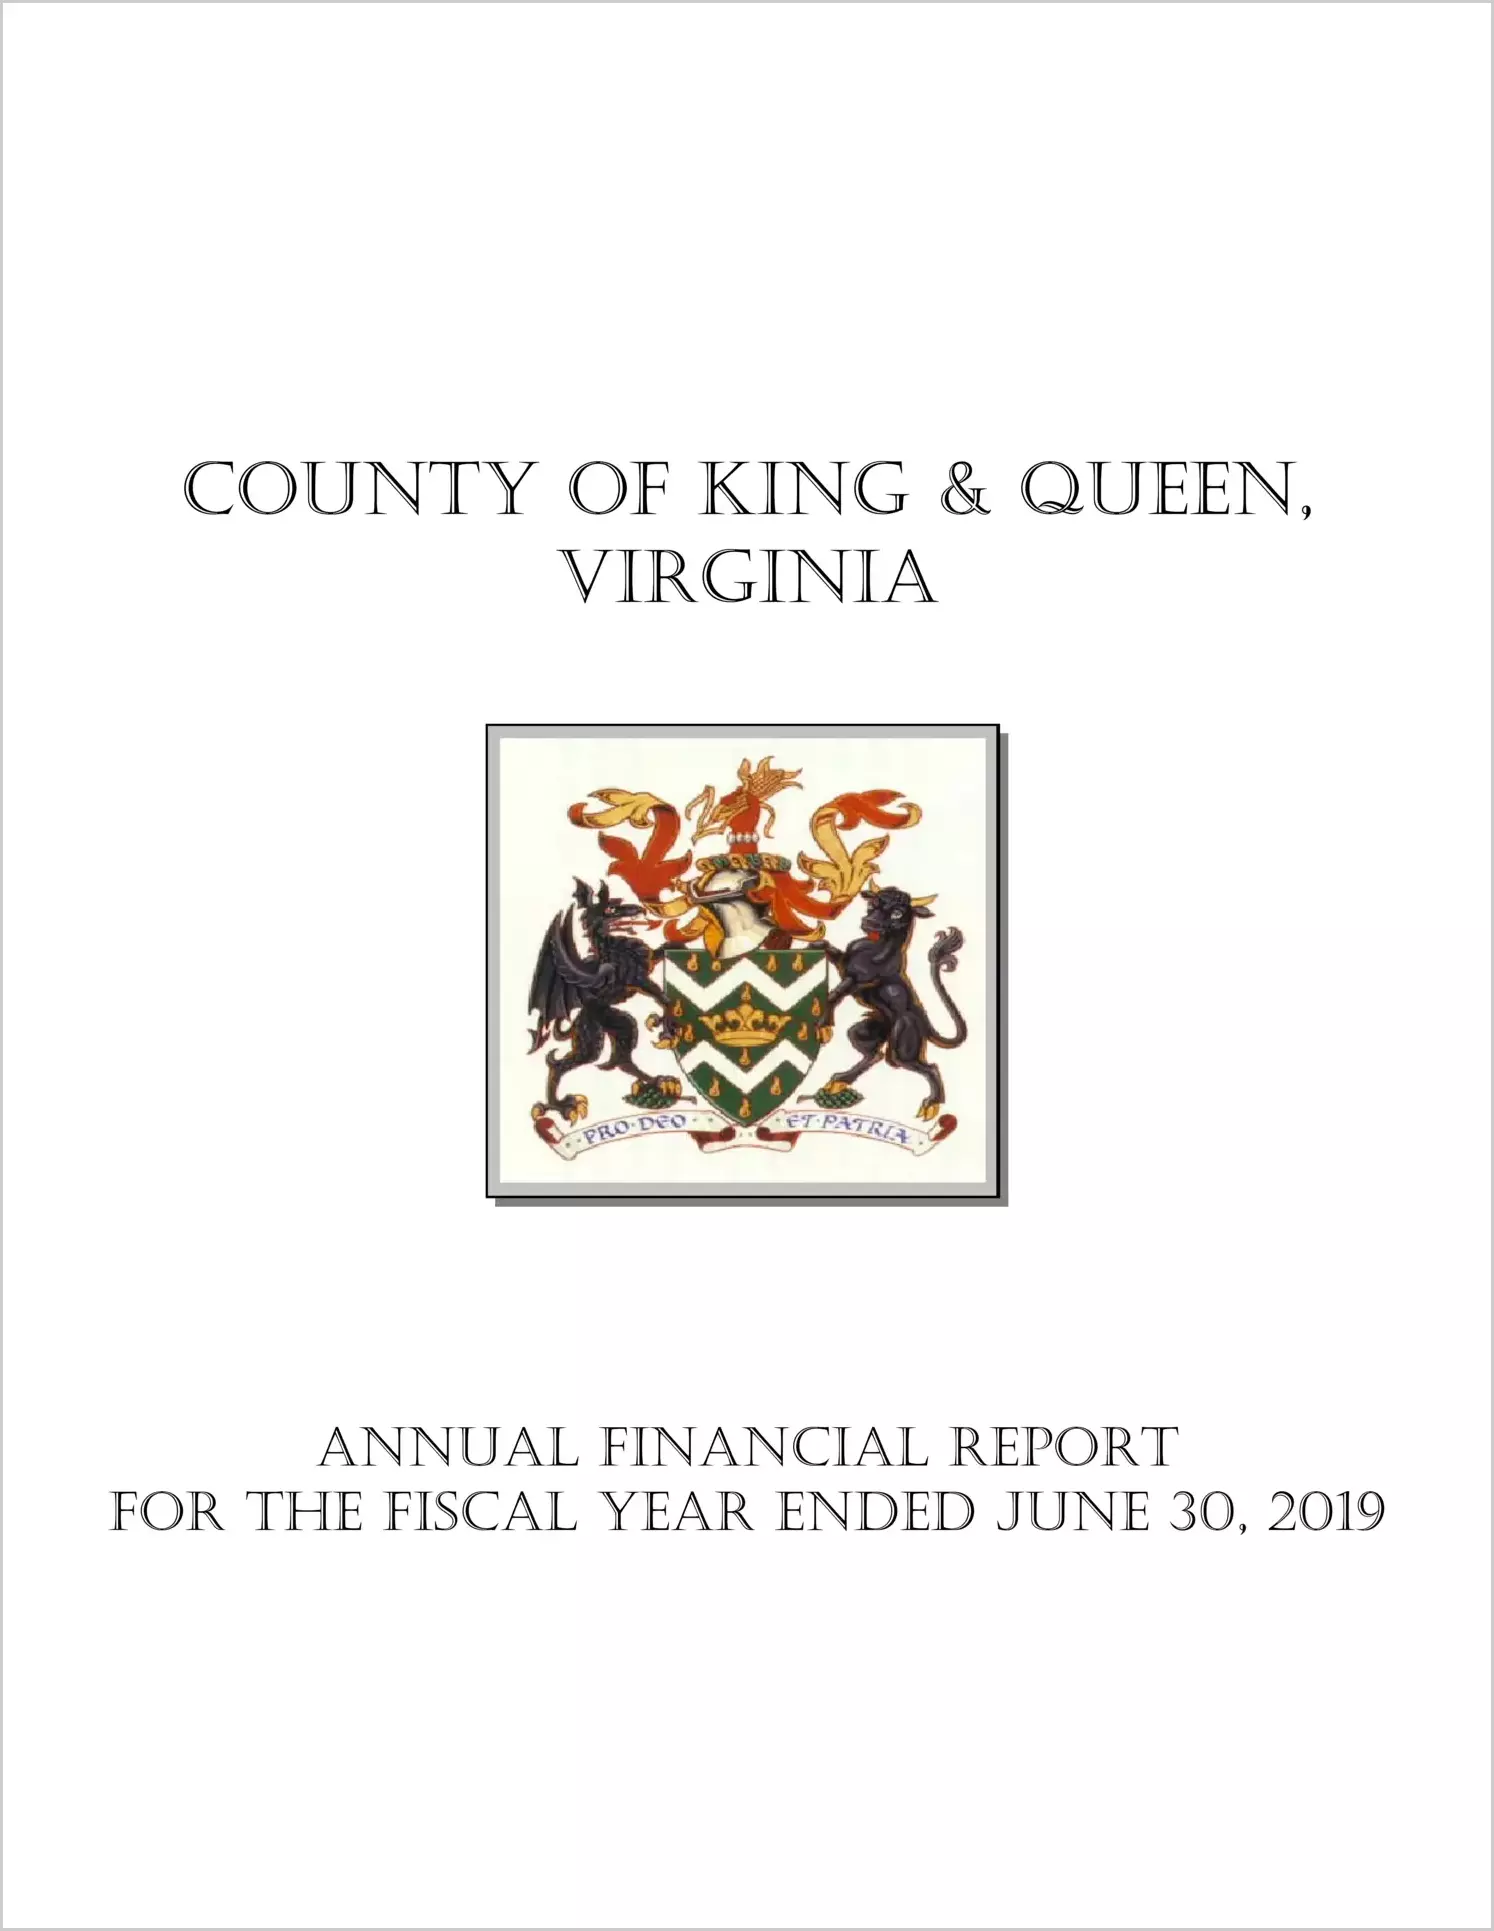 2019 Annual Financial Report for County of King and Queen